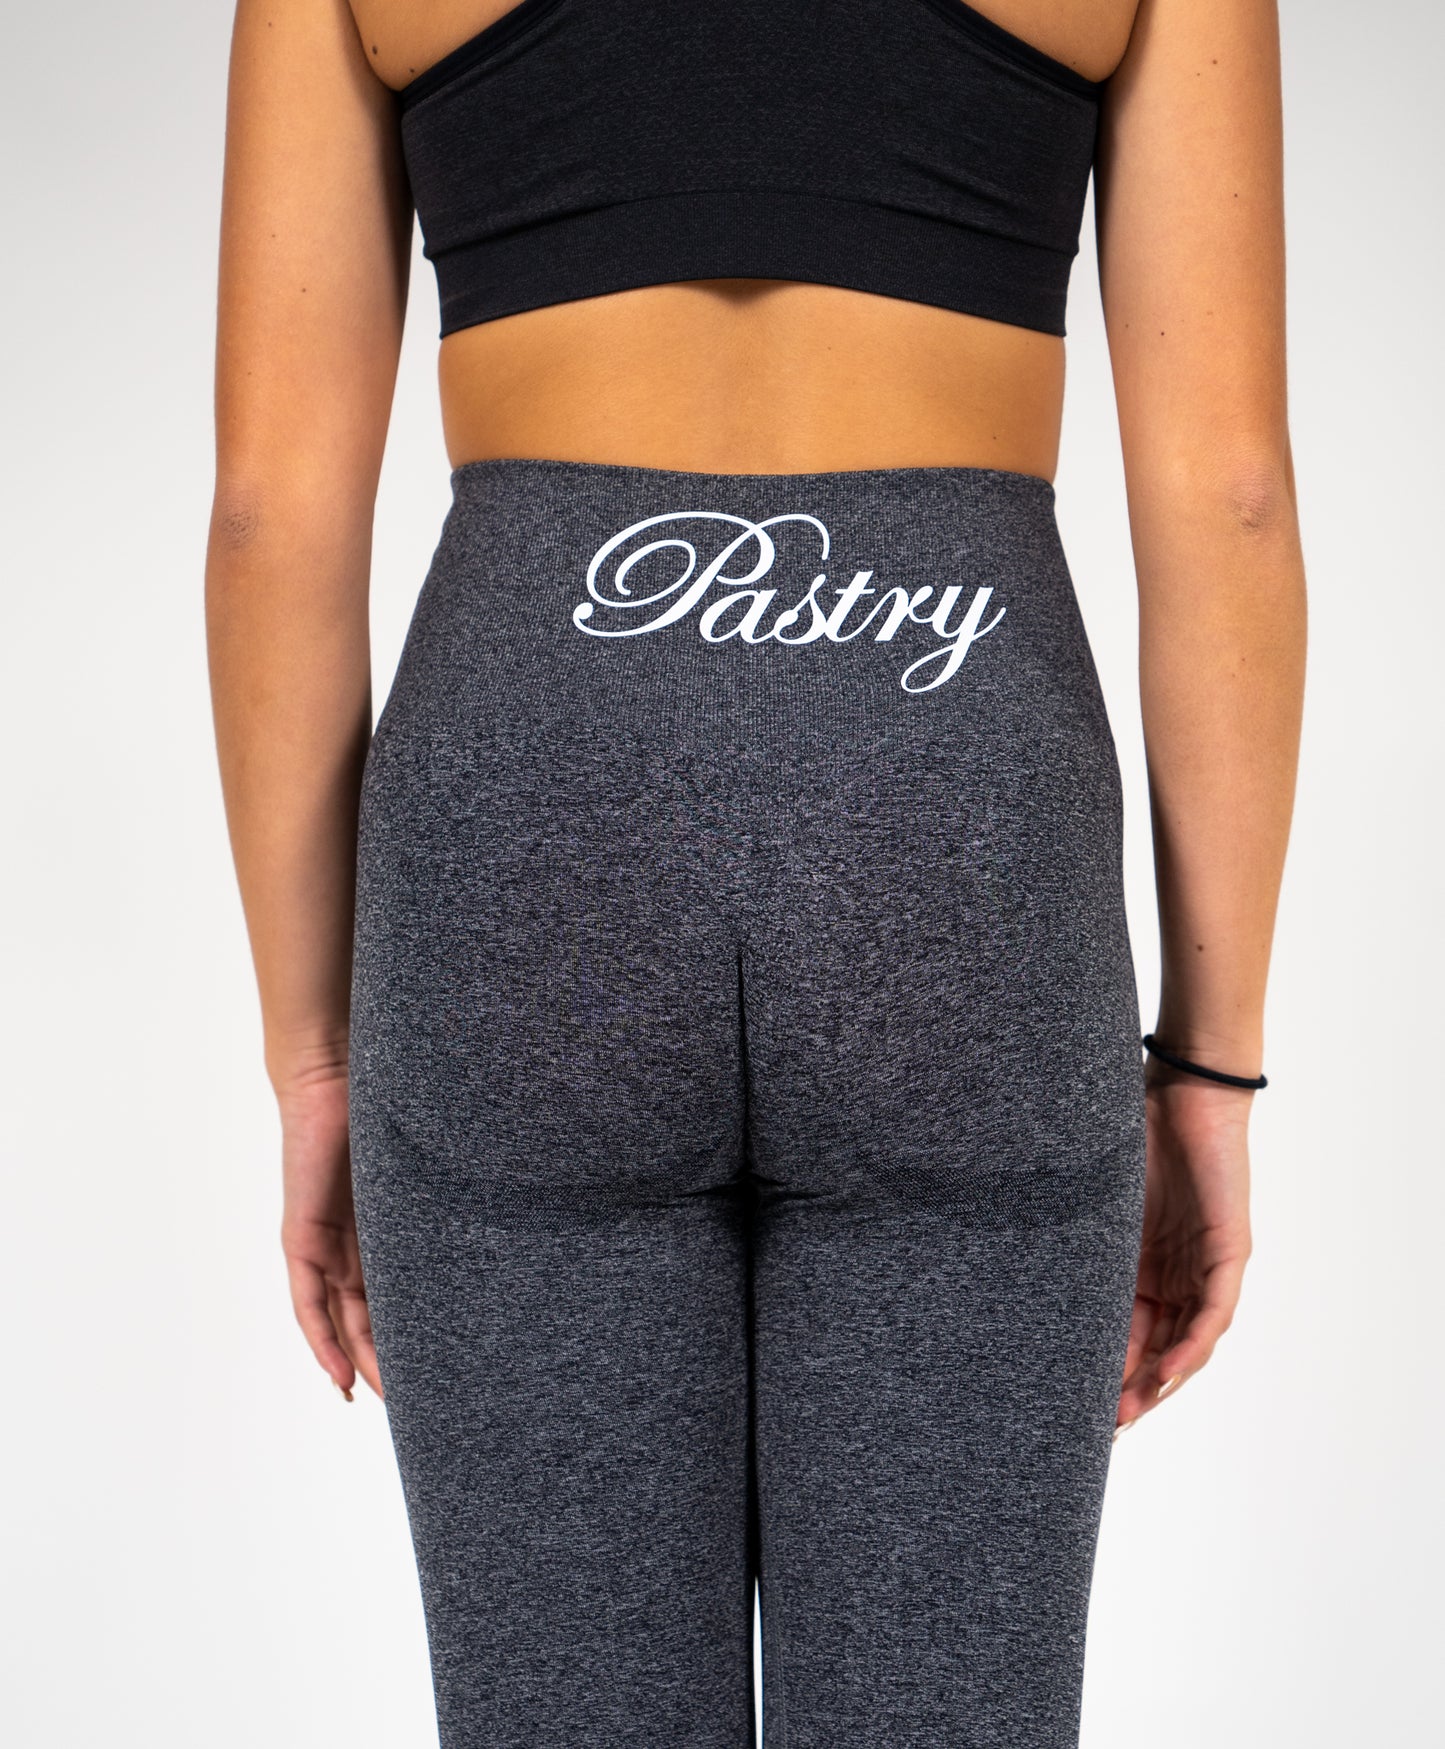 Woman wearing Pastry Seamless Leggings Black Speckled Marl back view